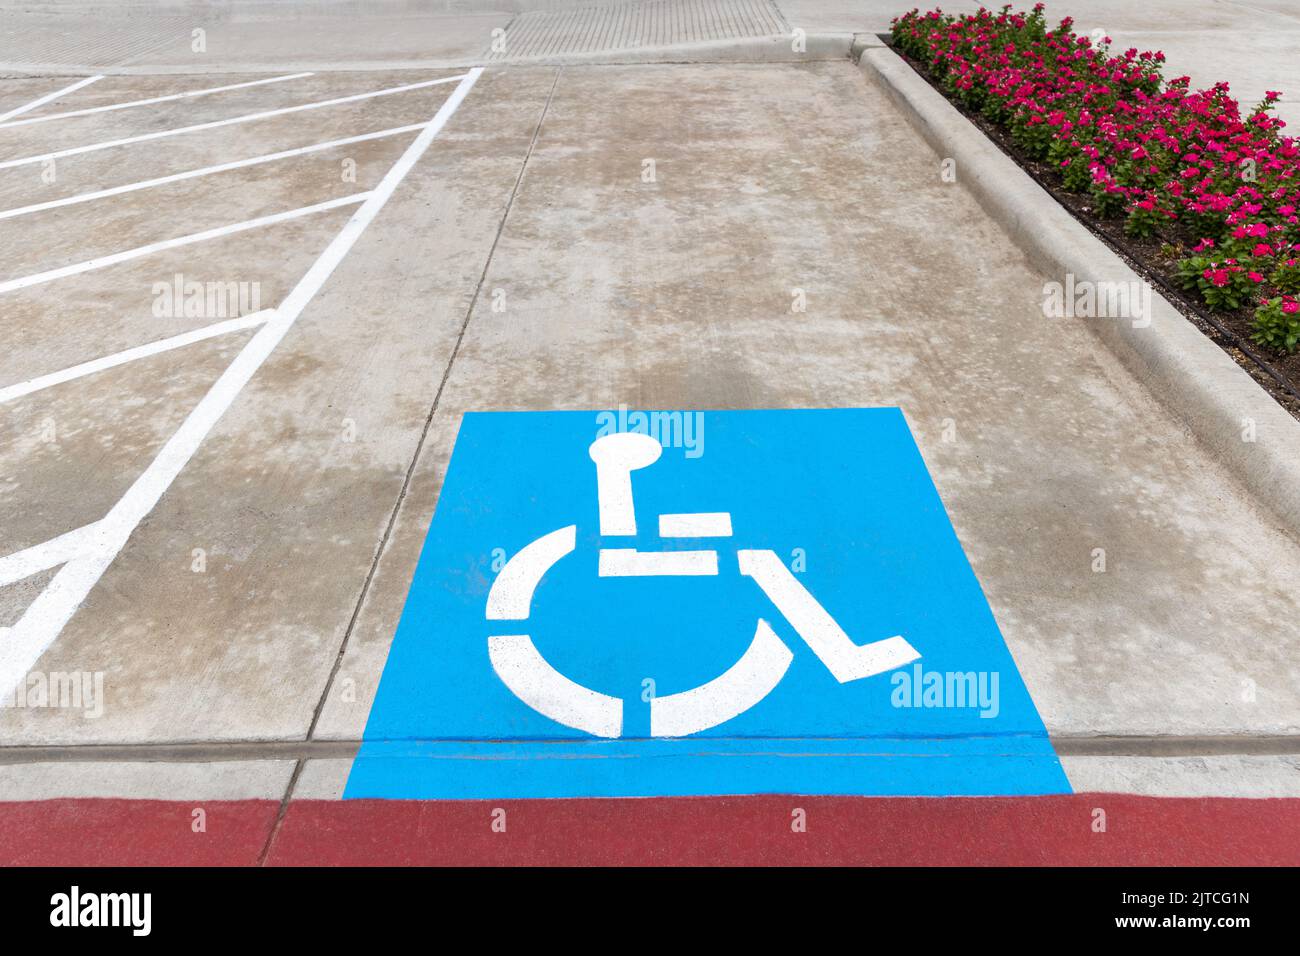 Blue sign, parking for the disabled, on the asphalt road with white road markings and flowers on the side Stock Photo